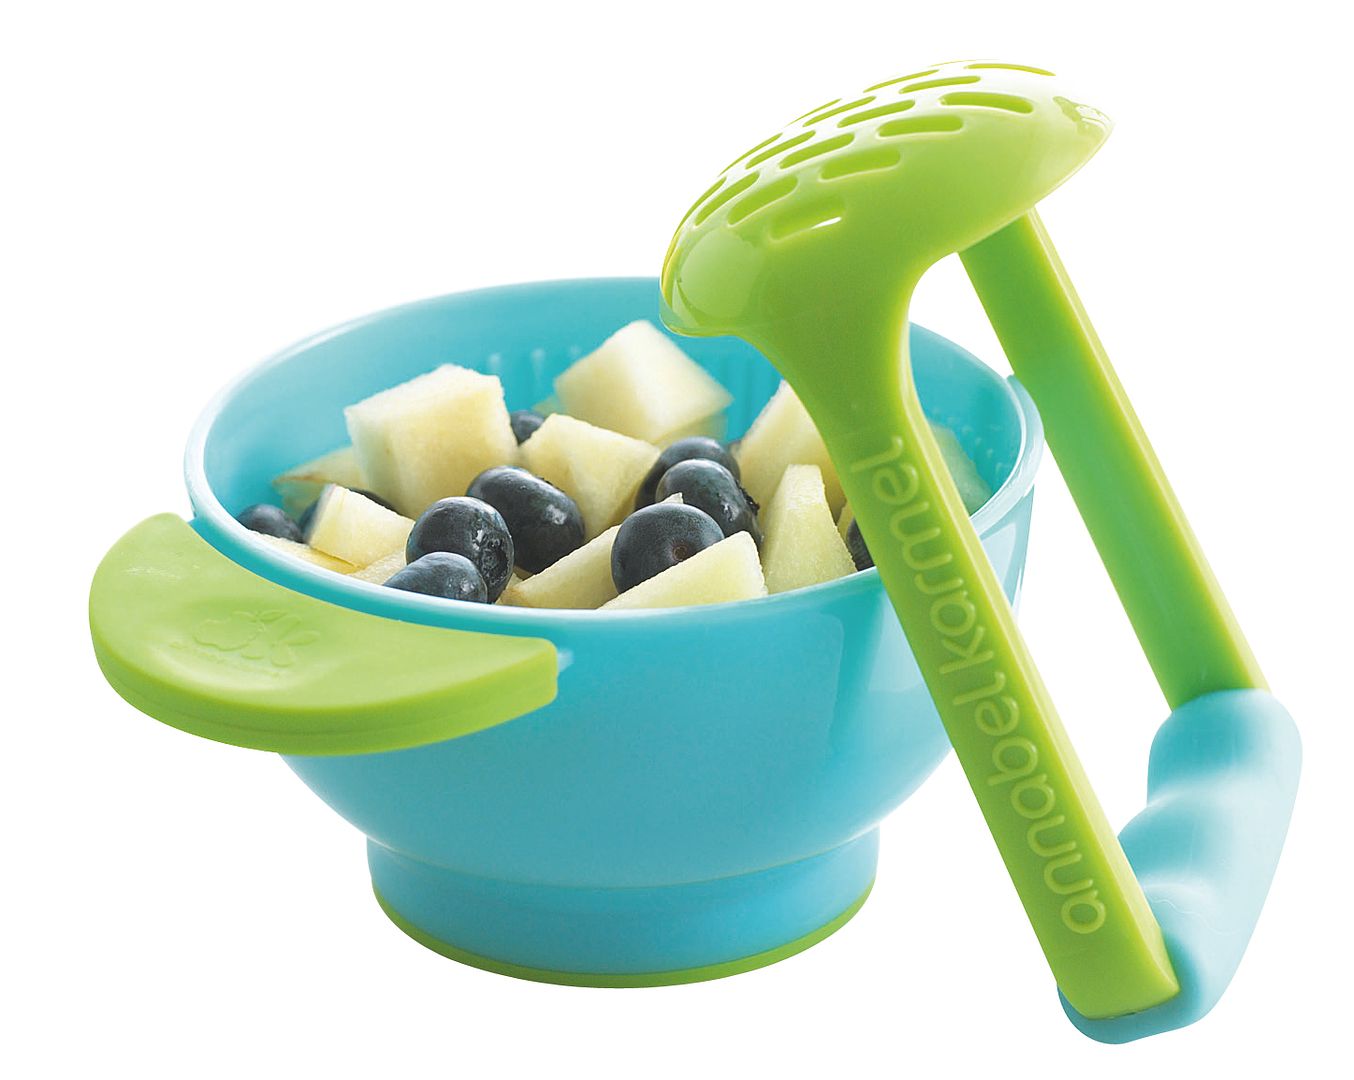 NUK Food Masher and Bowl: affordable option for making homemade baby food 